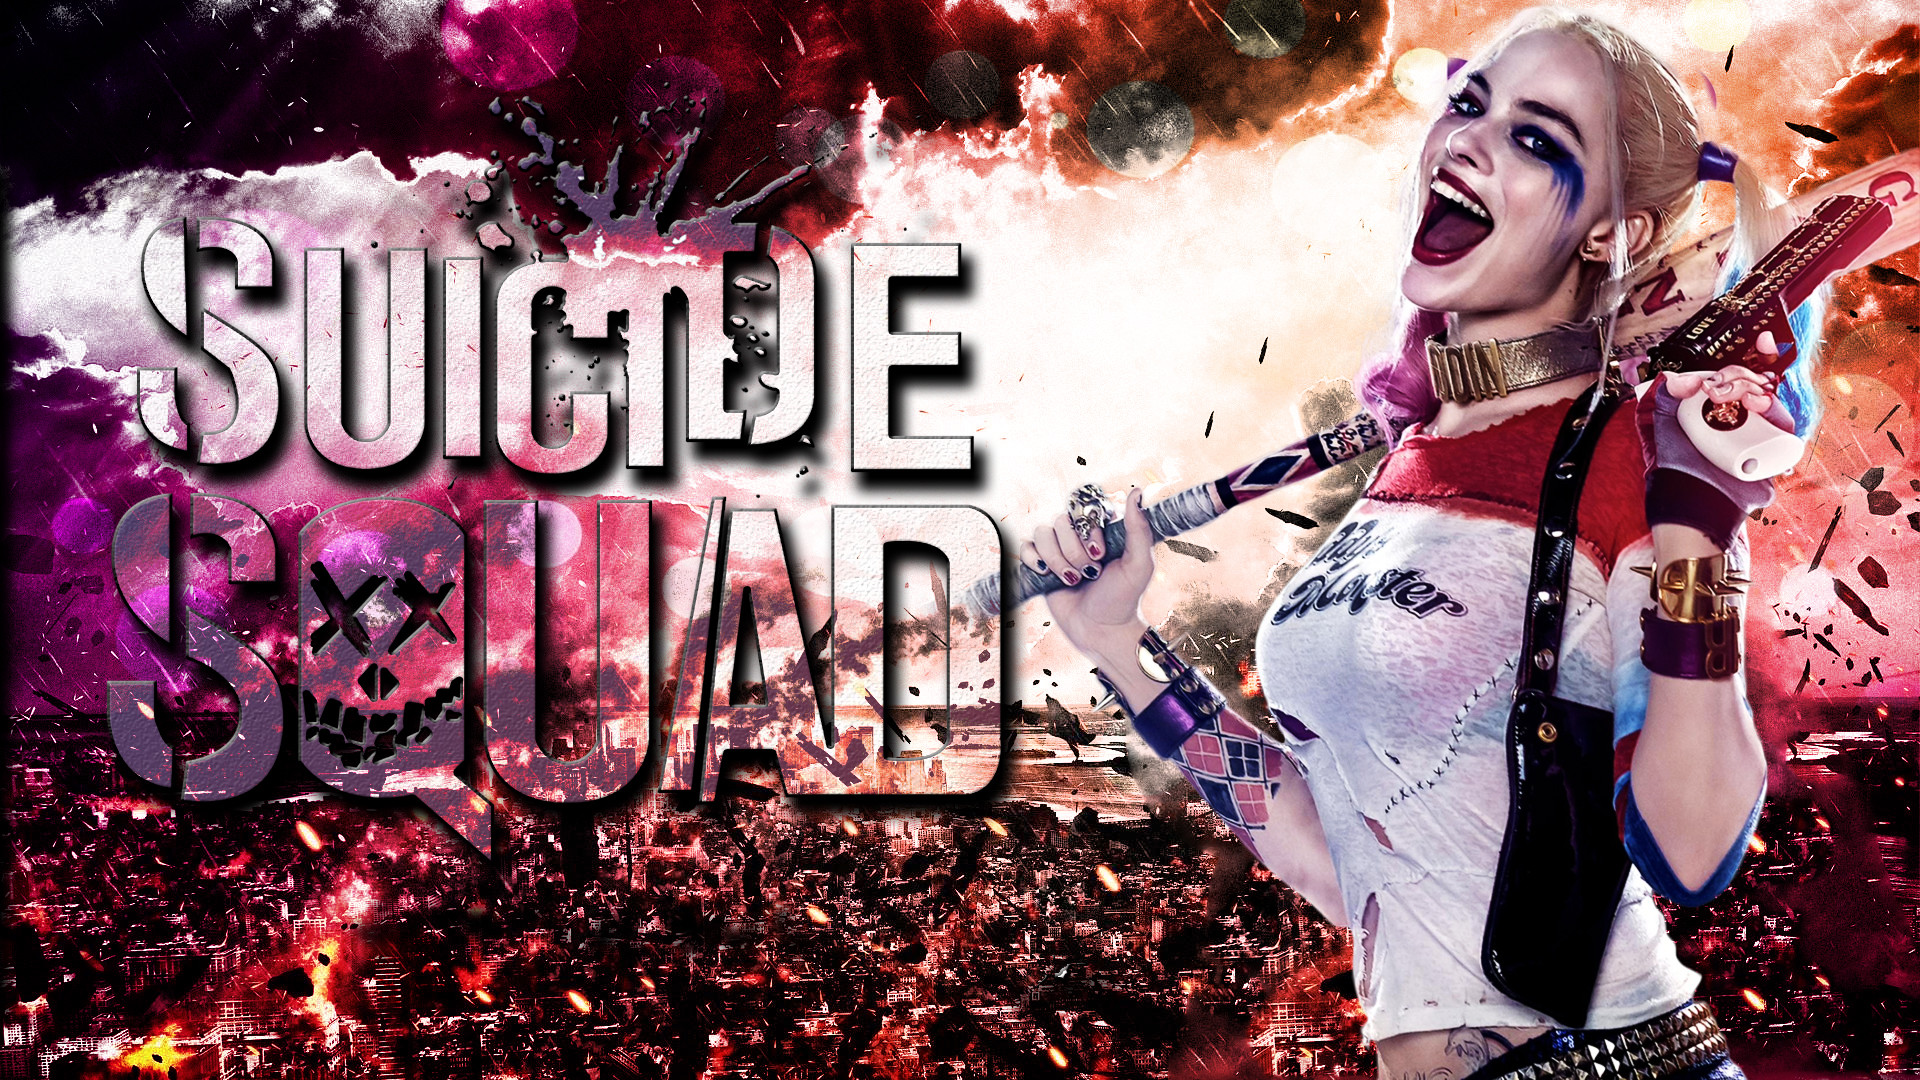 Harley Quinn Suicide Squad Wallpaper Image